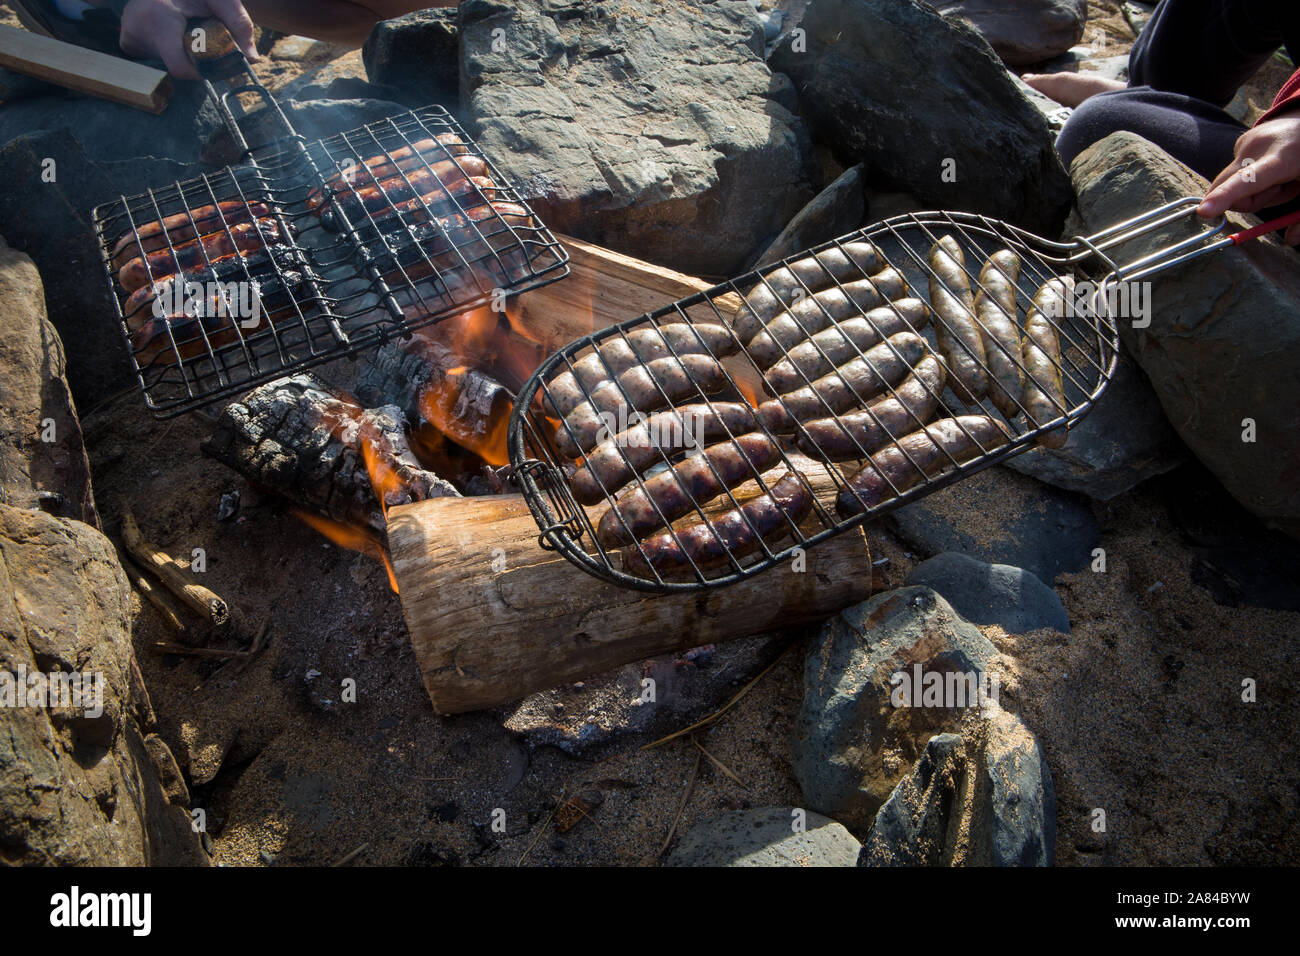 BBQing sausages on an open fire on the beach, Cornwall, England. Stock Photo